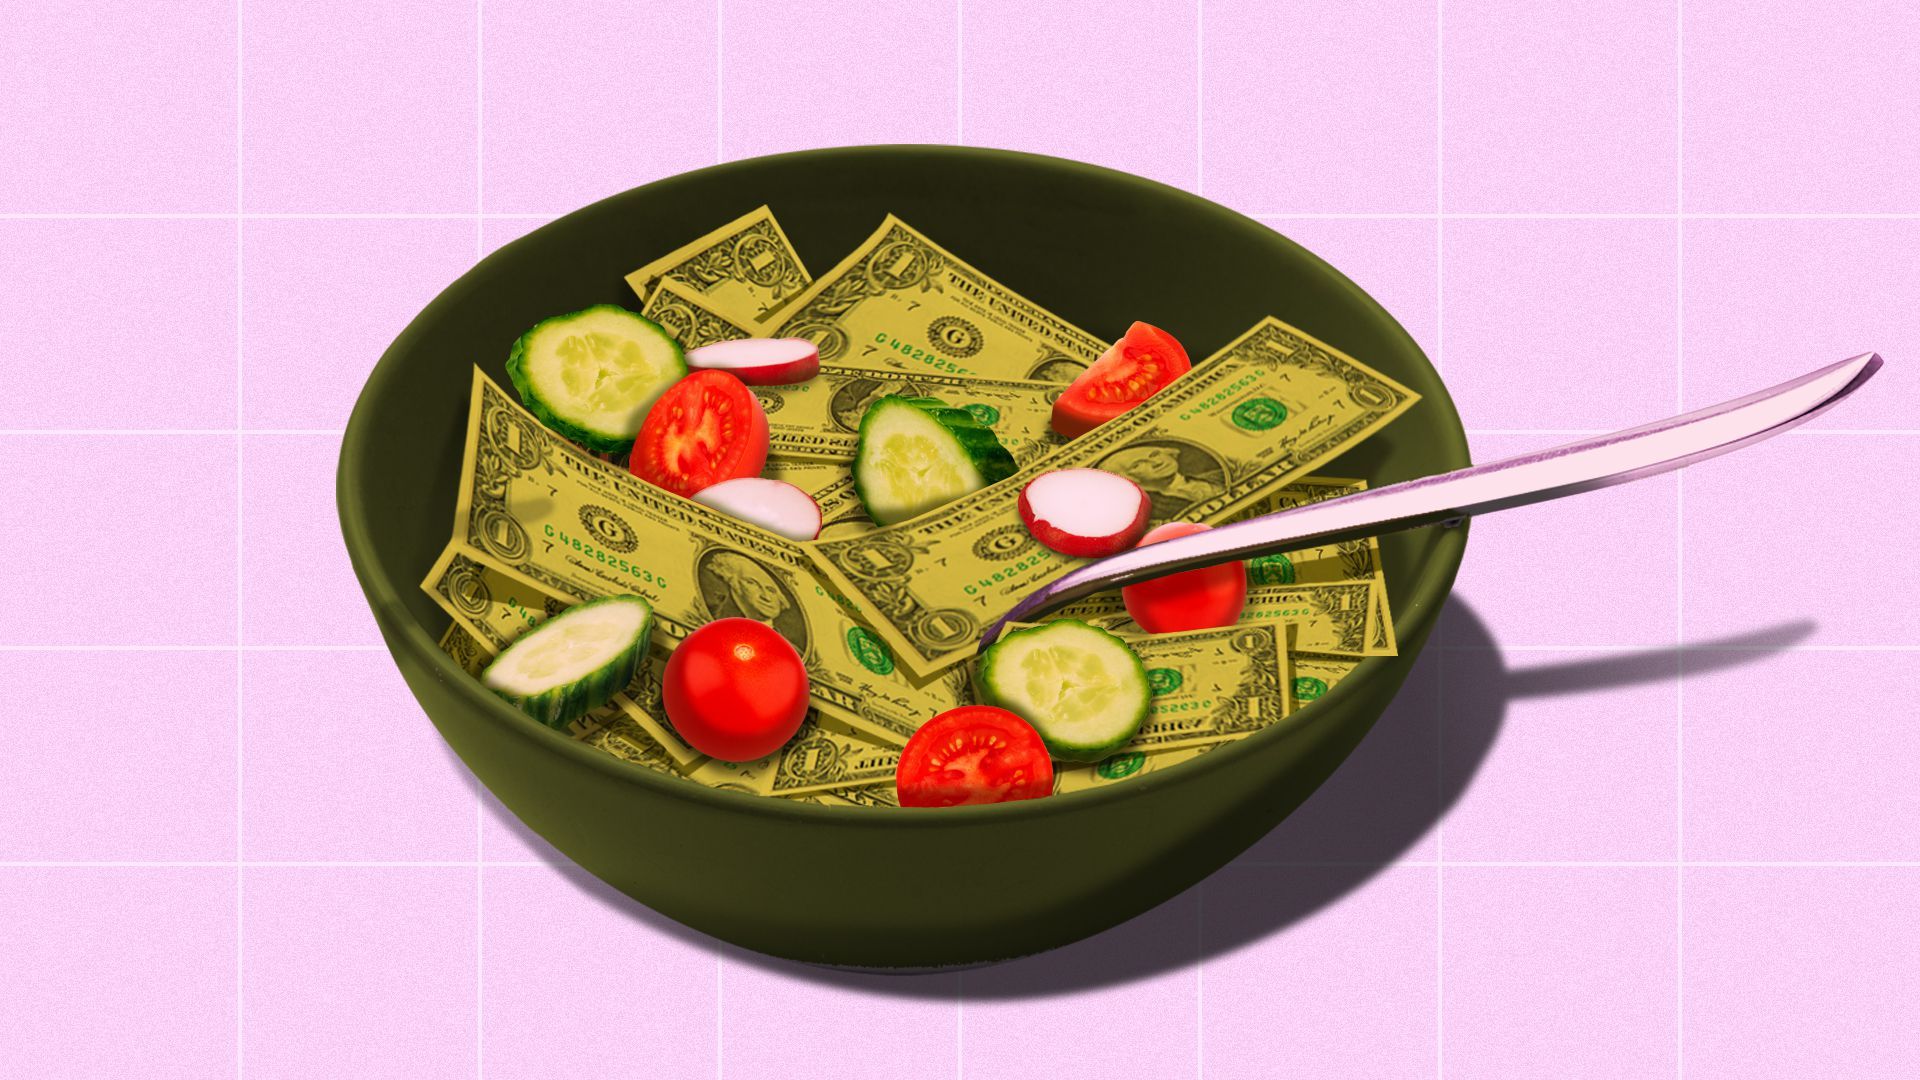 Illustration of a bowl of salad made out of money